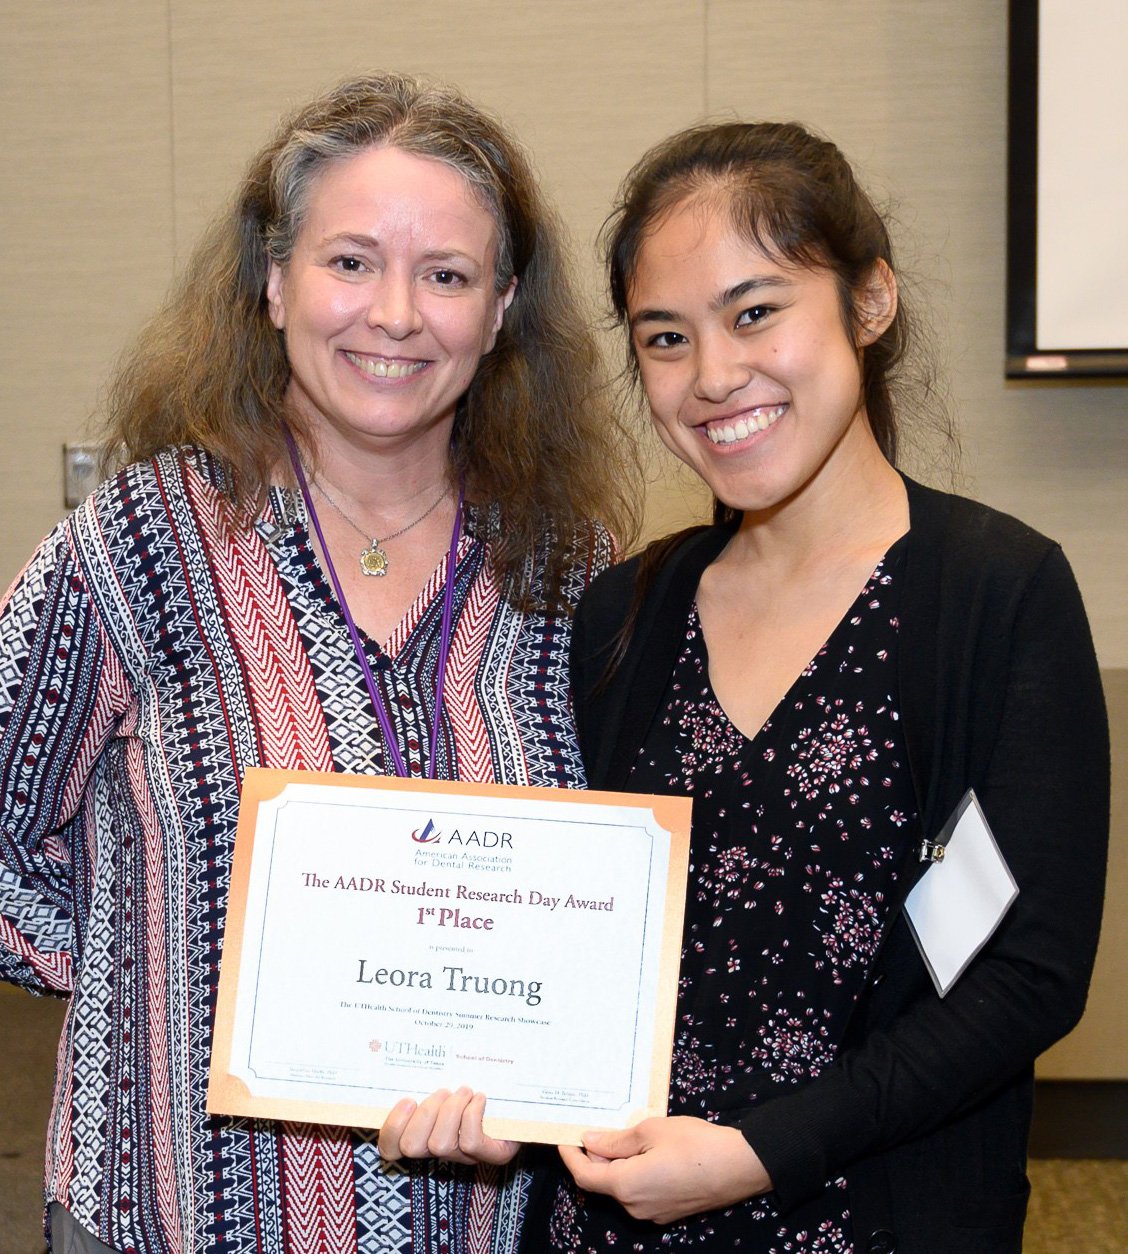 Dr. Gena Tribble, student research coordinator, presented the certificate for first place to Thuy Nhu (Leora) Truong, a third-year dental student.